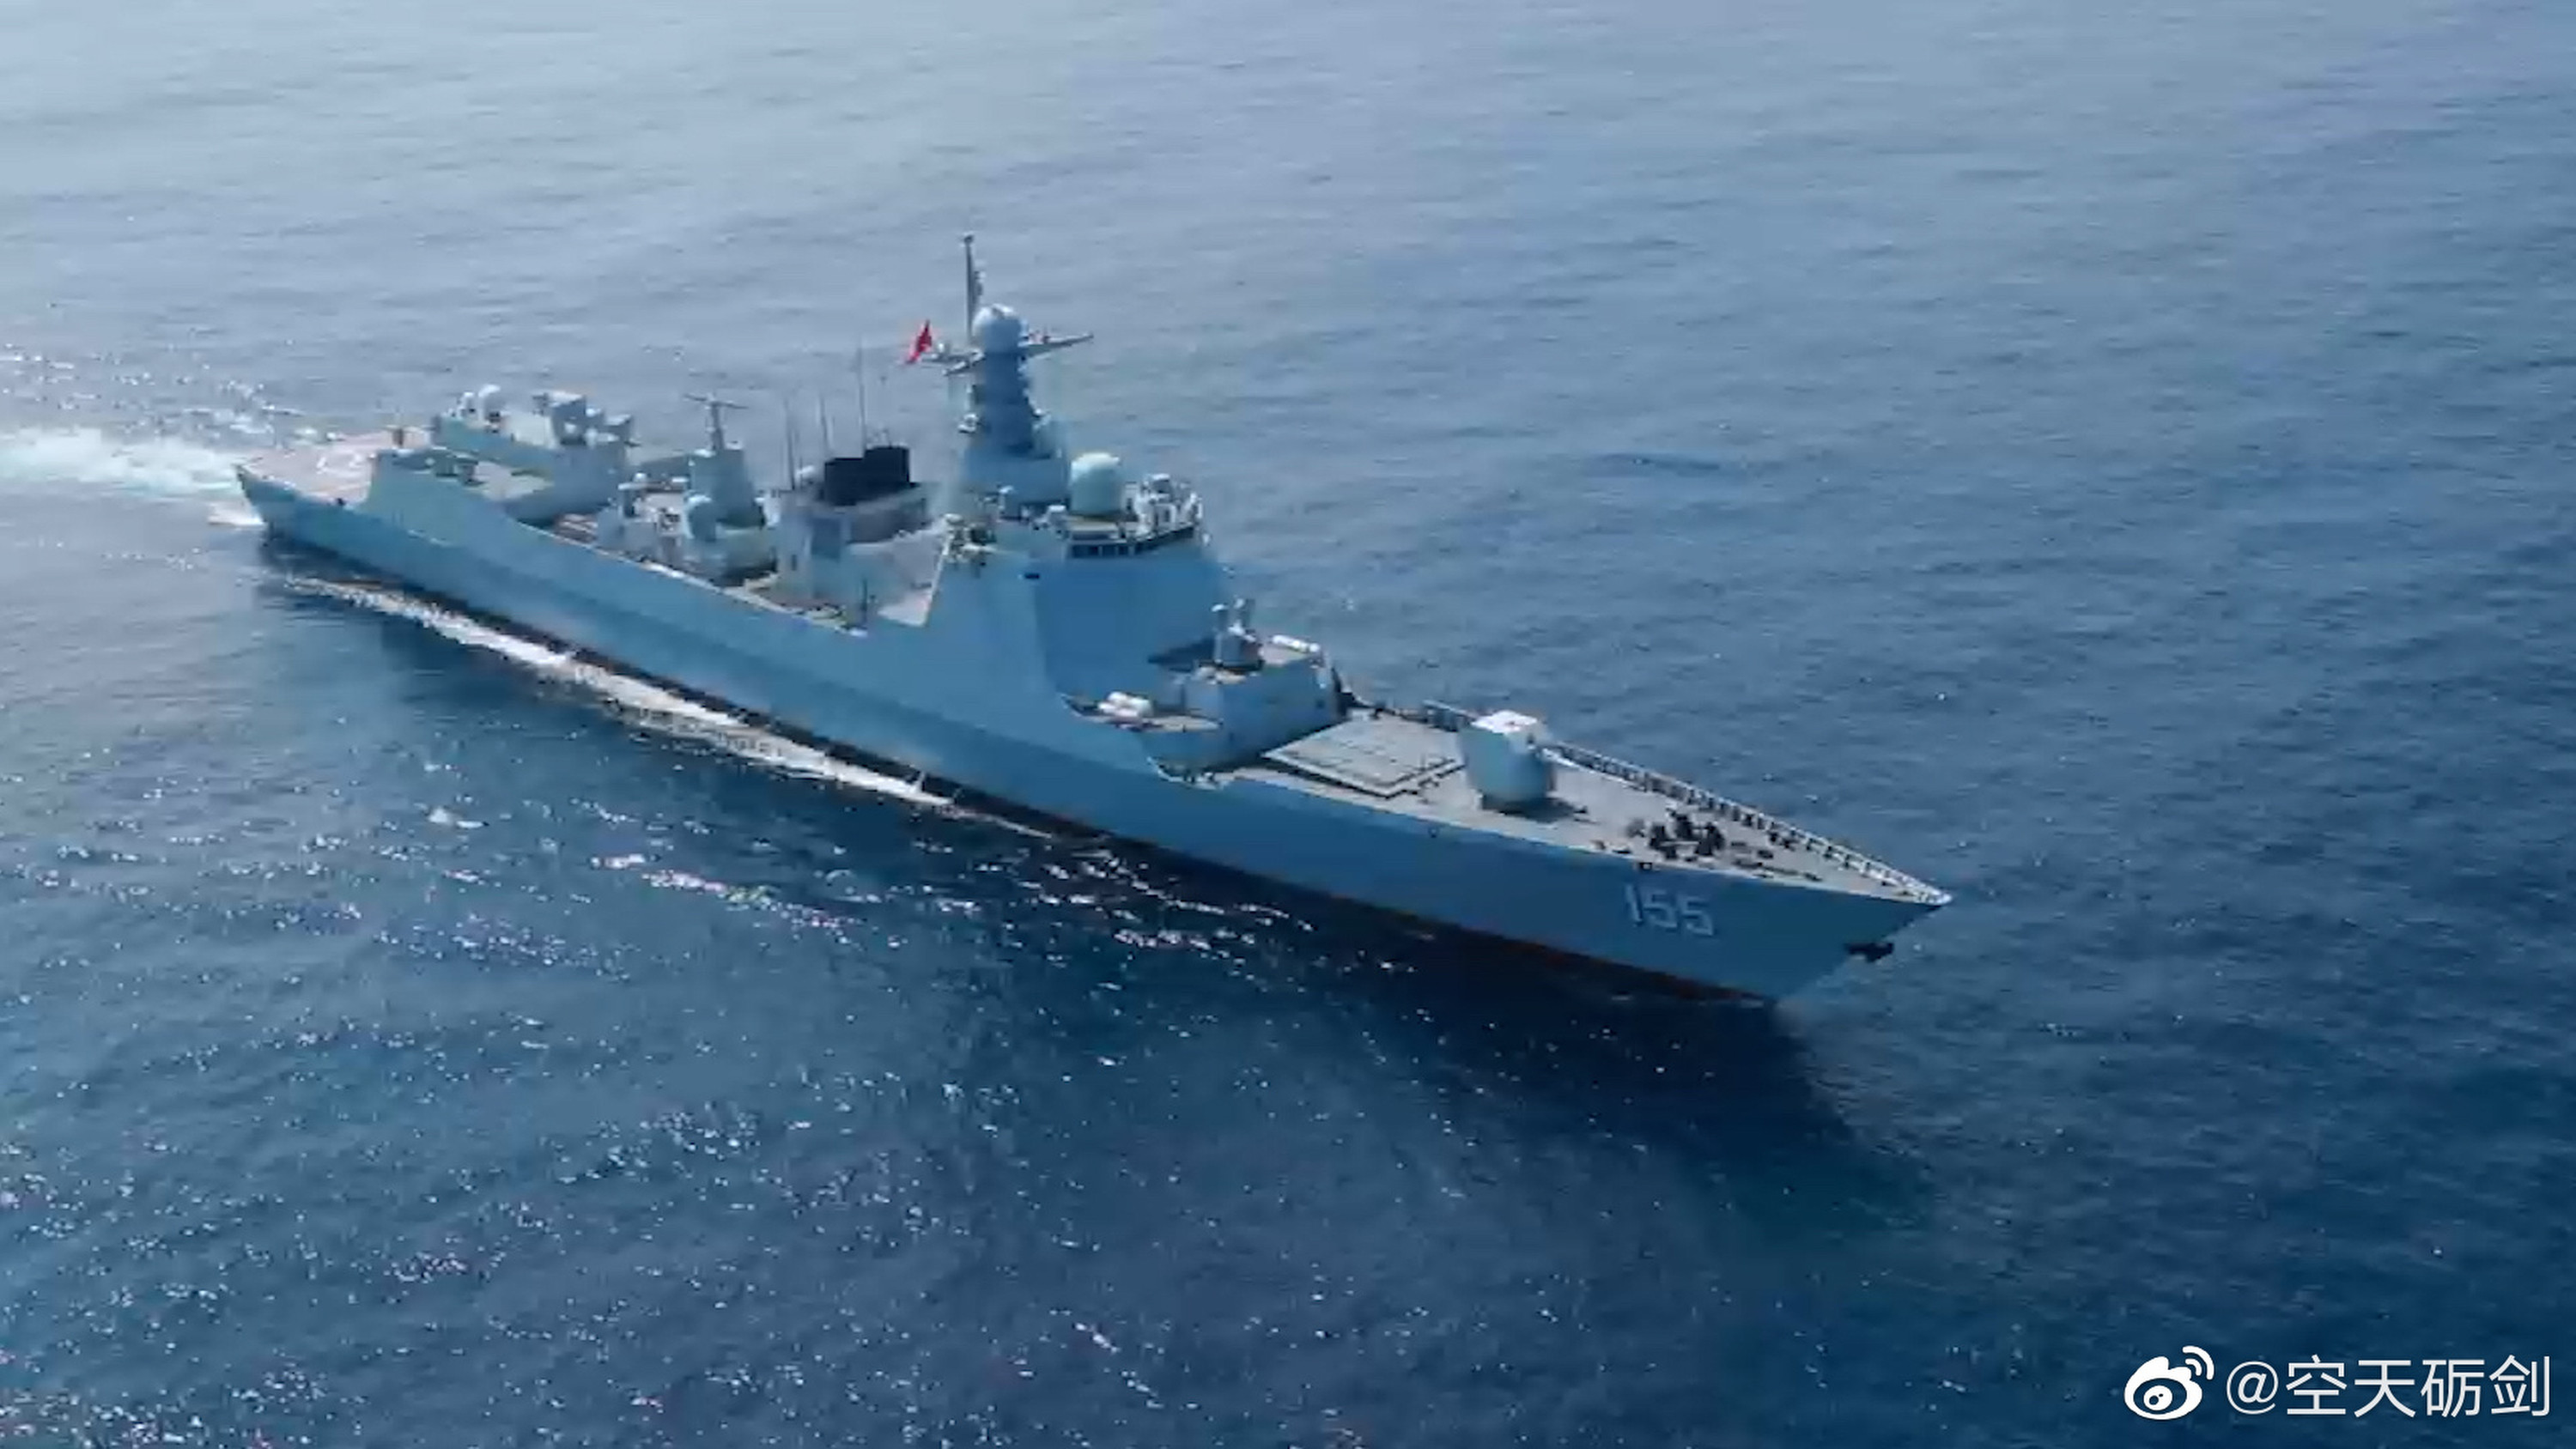 In August, the PLA Eastern Theatre Command staged joint training exercises off Taiwan and in their air space. Taiwan’s defence minister says the mainland has sent warships daily since August. Photo: Weibo